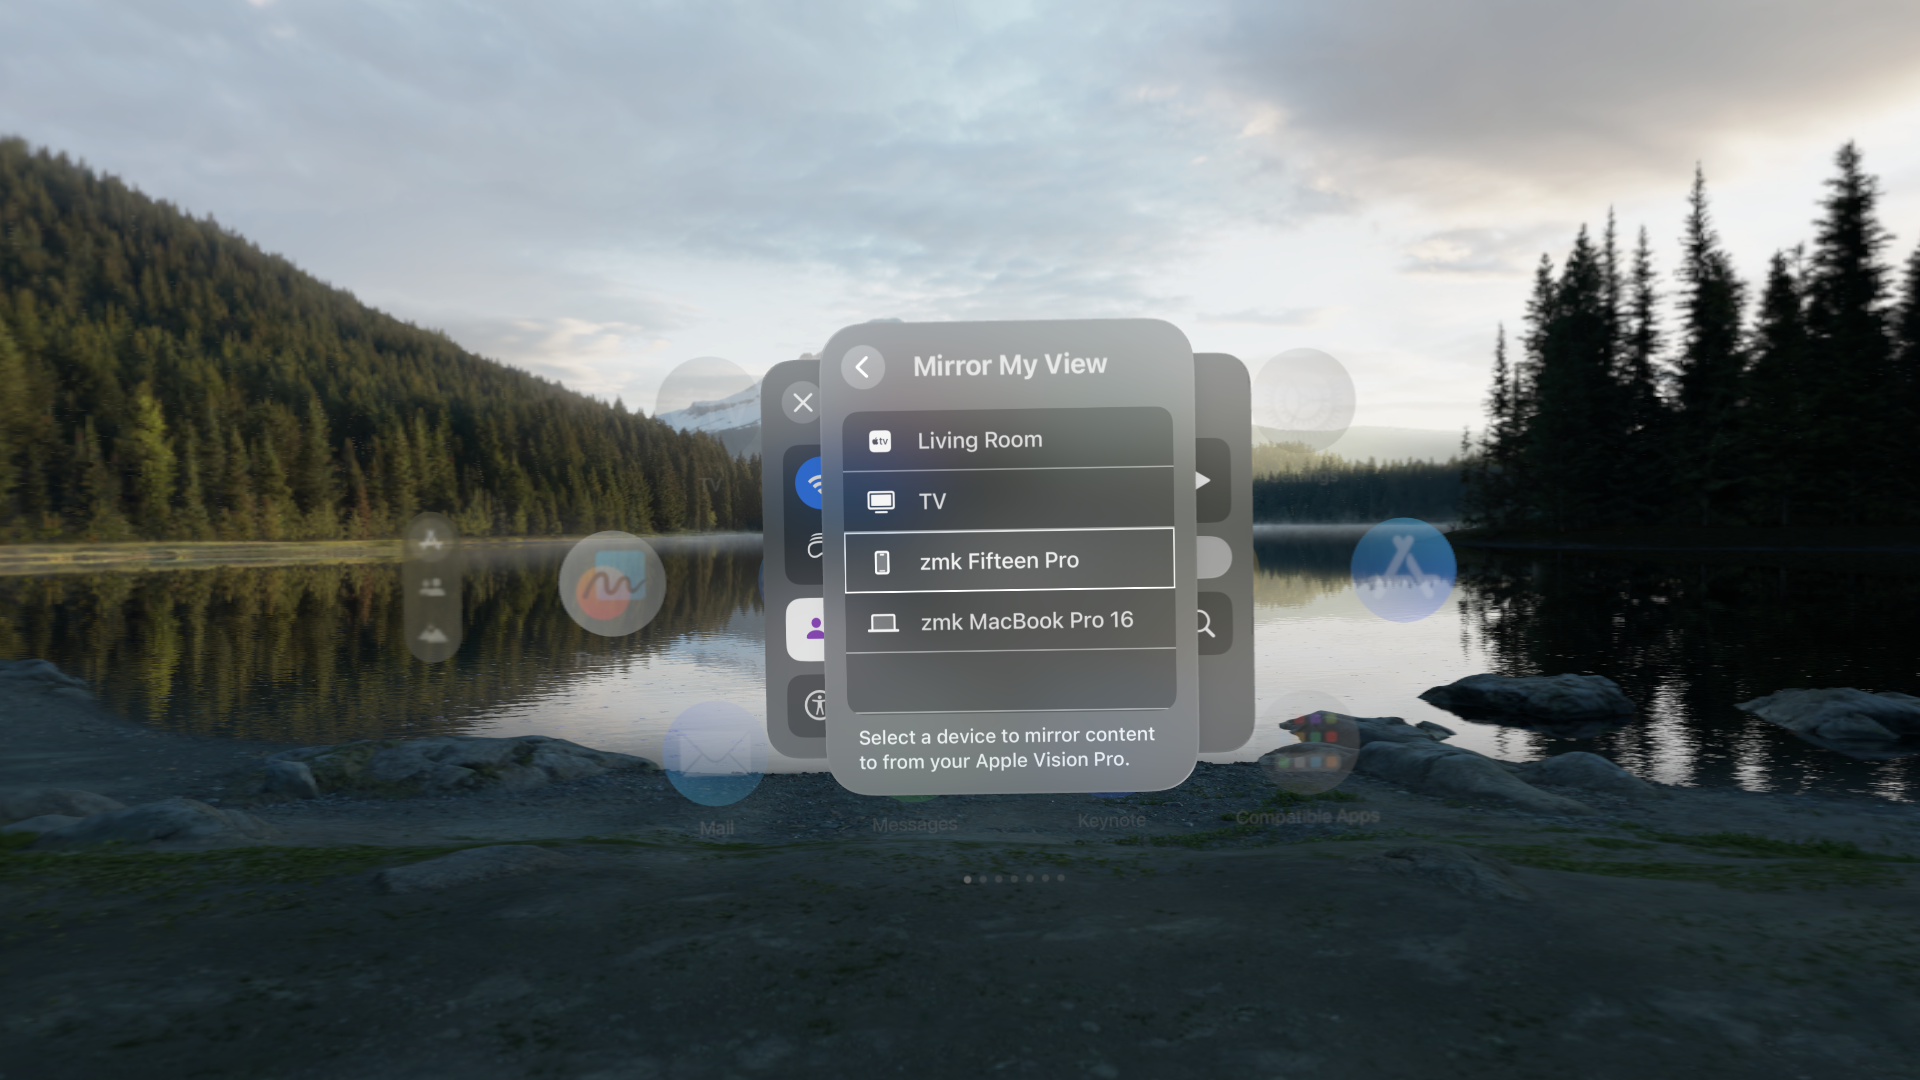 A screenshot of the View Mirroring menu within Control Center on visionOS. A window with "Mirror My View" heading has a list of options including an Apple TV named "Living Room", a TV, an iPhone named "zmk Fifteen Pro", and a Mac named "zmk MacBook Pro 16". Text at the bottom of the window reads "Select a device to mirror content to from your Apple Vision Pro".